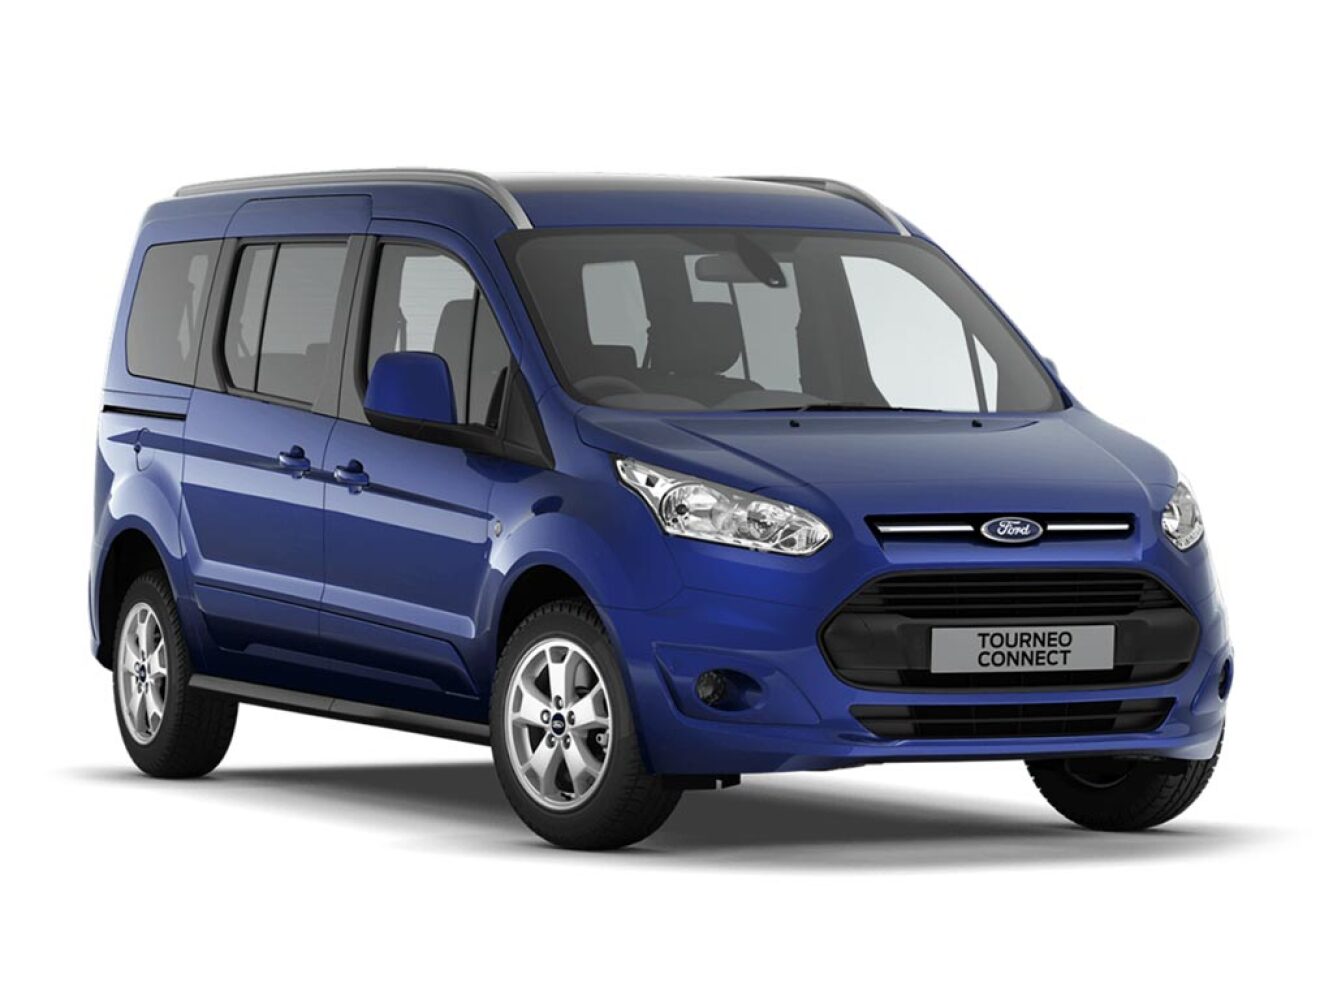 New Ford Grand Tourneo Connect 1.5 Tdci 120 Zetec 5Dr ...